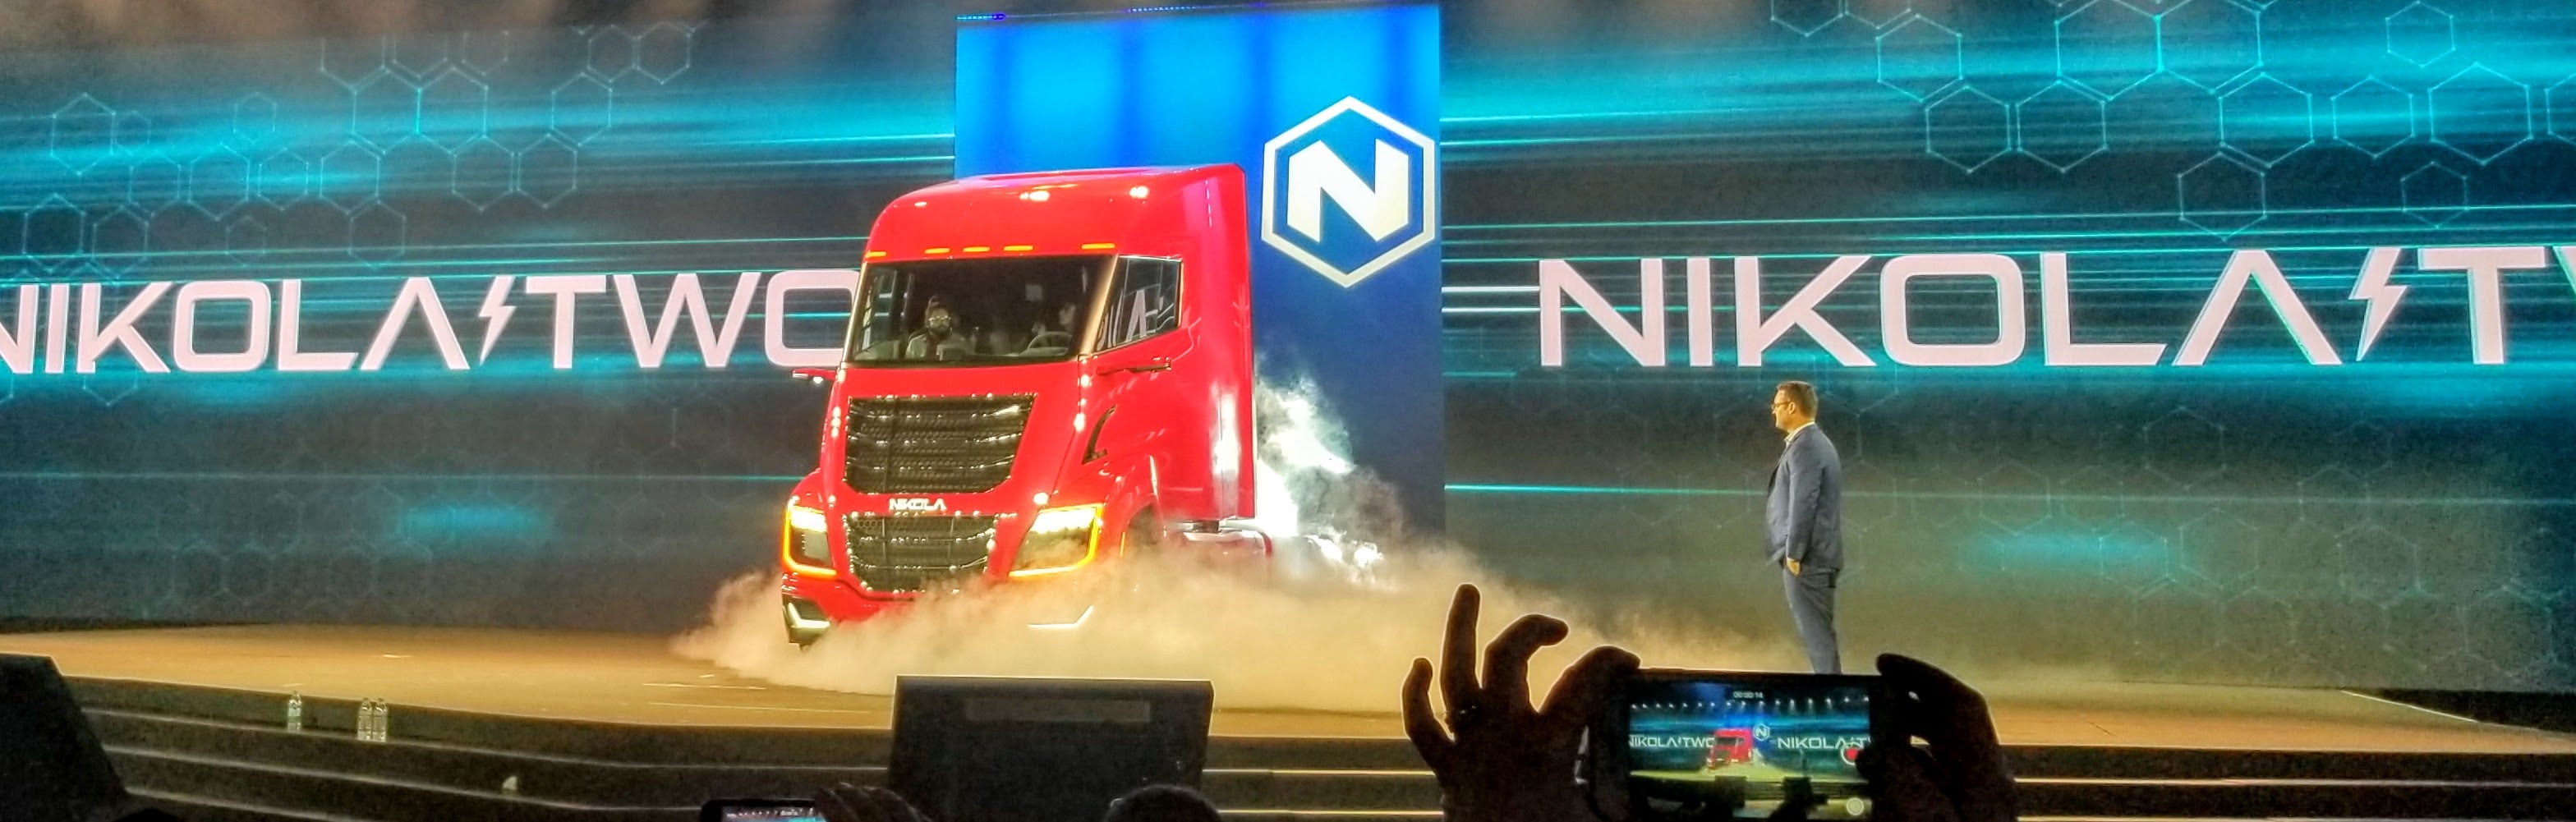 Nikola Pushes Deeper Into Battery Electric Vehicles With Next Generation Battery Tech